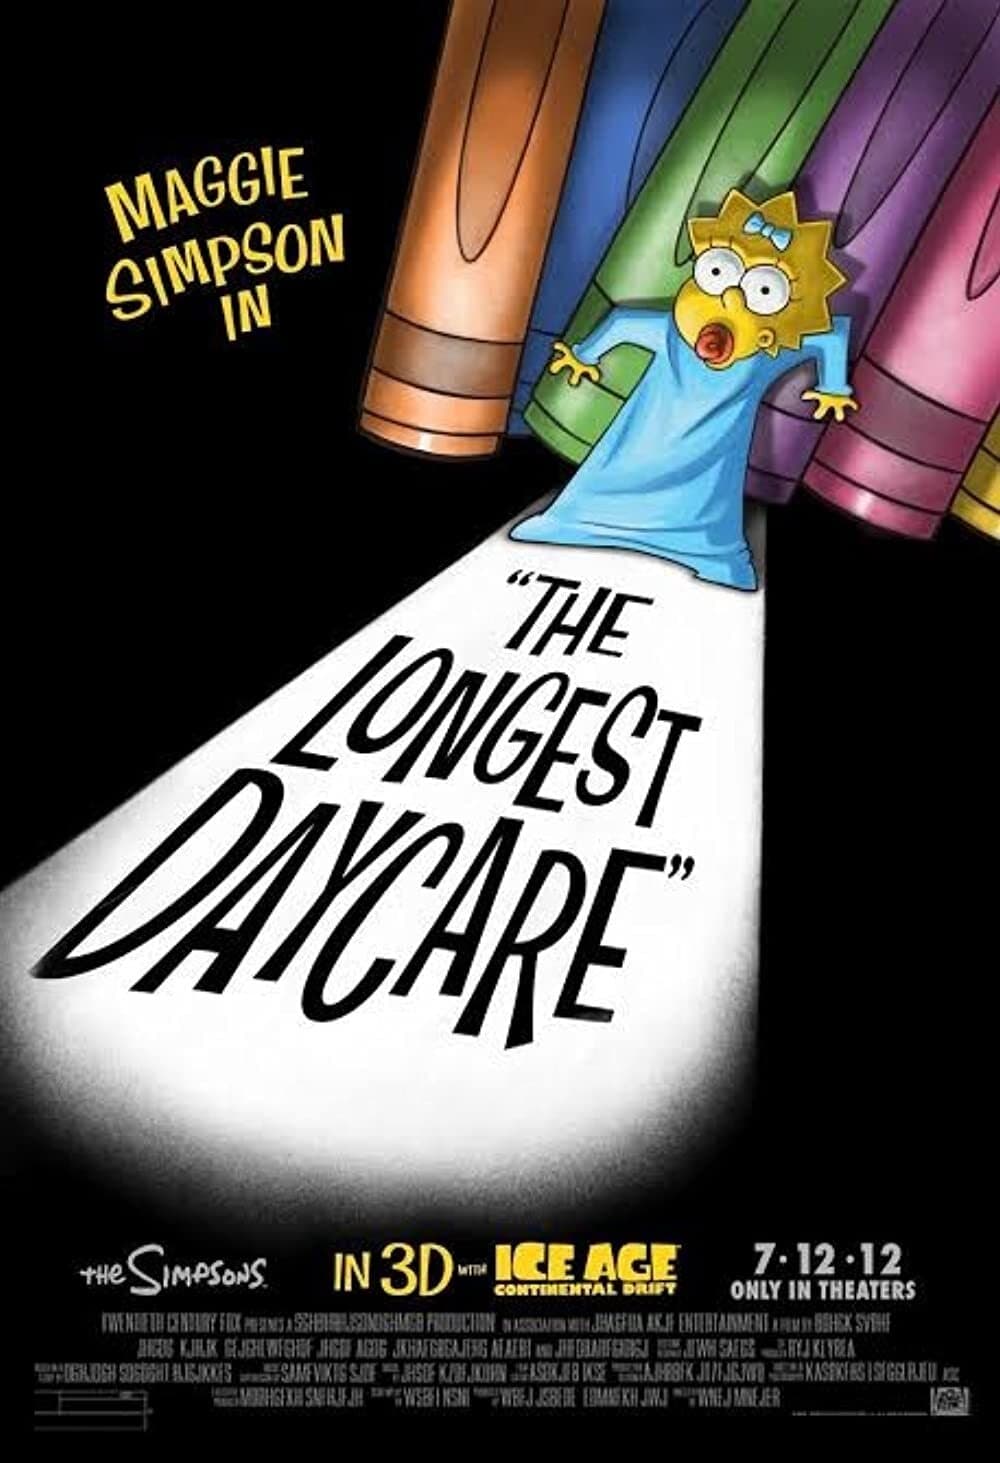 Maggie Simpson in The Longest Daycare (2012)